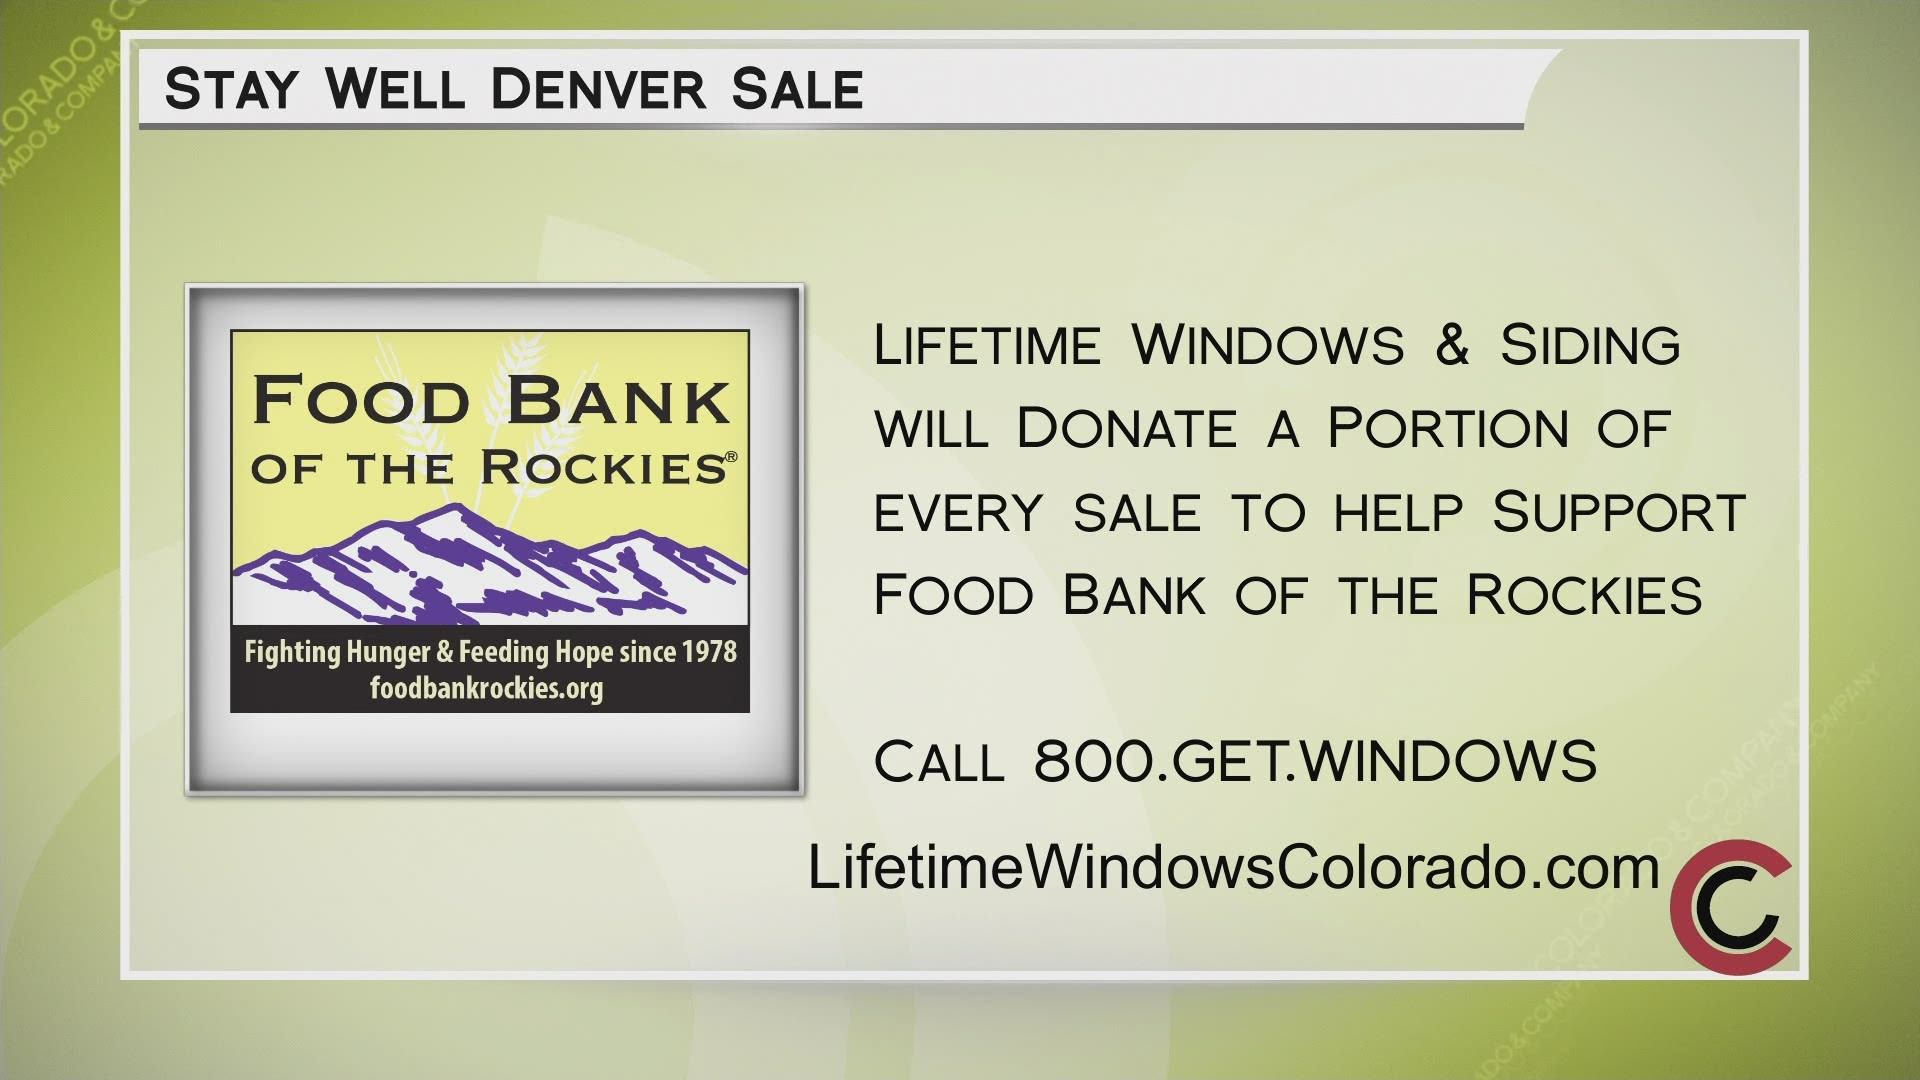 Visit LifetimeWindowsColorado.com or call 800.GET.WINDOWS to get 40% off windows, doors, siding and install. Part of all sales will go to Food Bank of the Rockies.